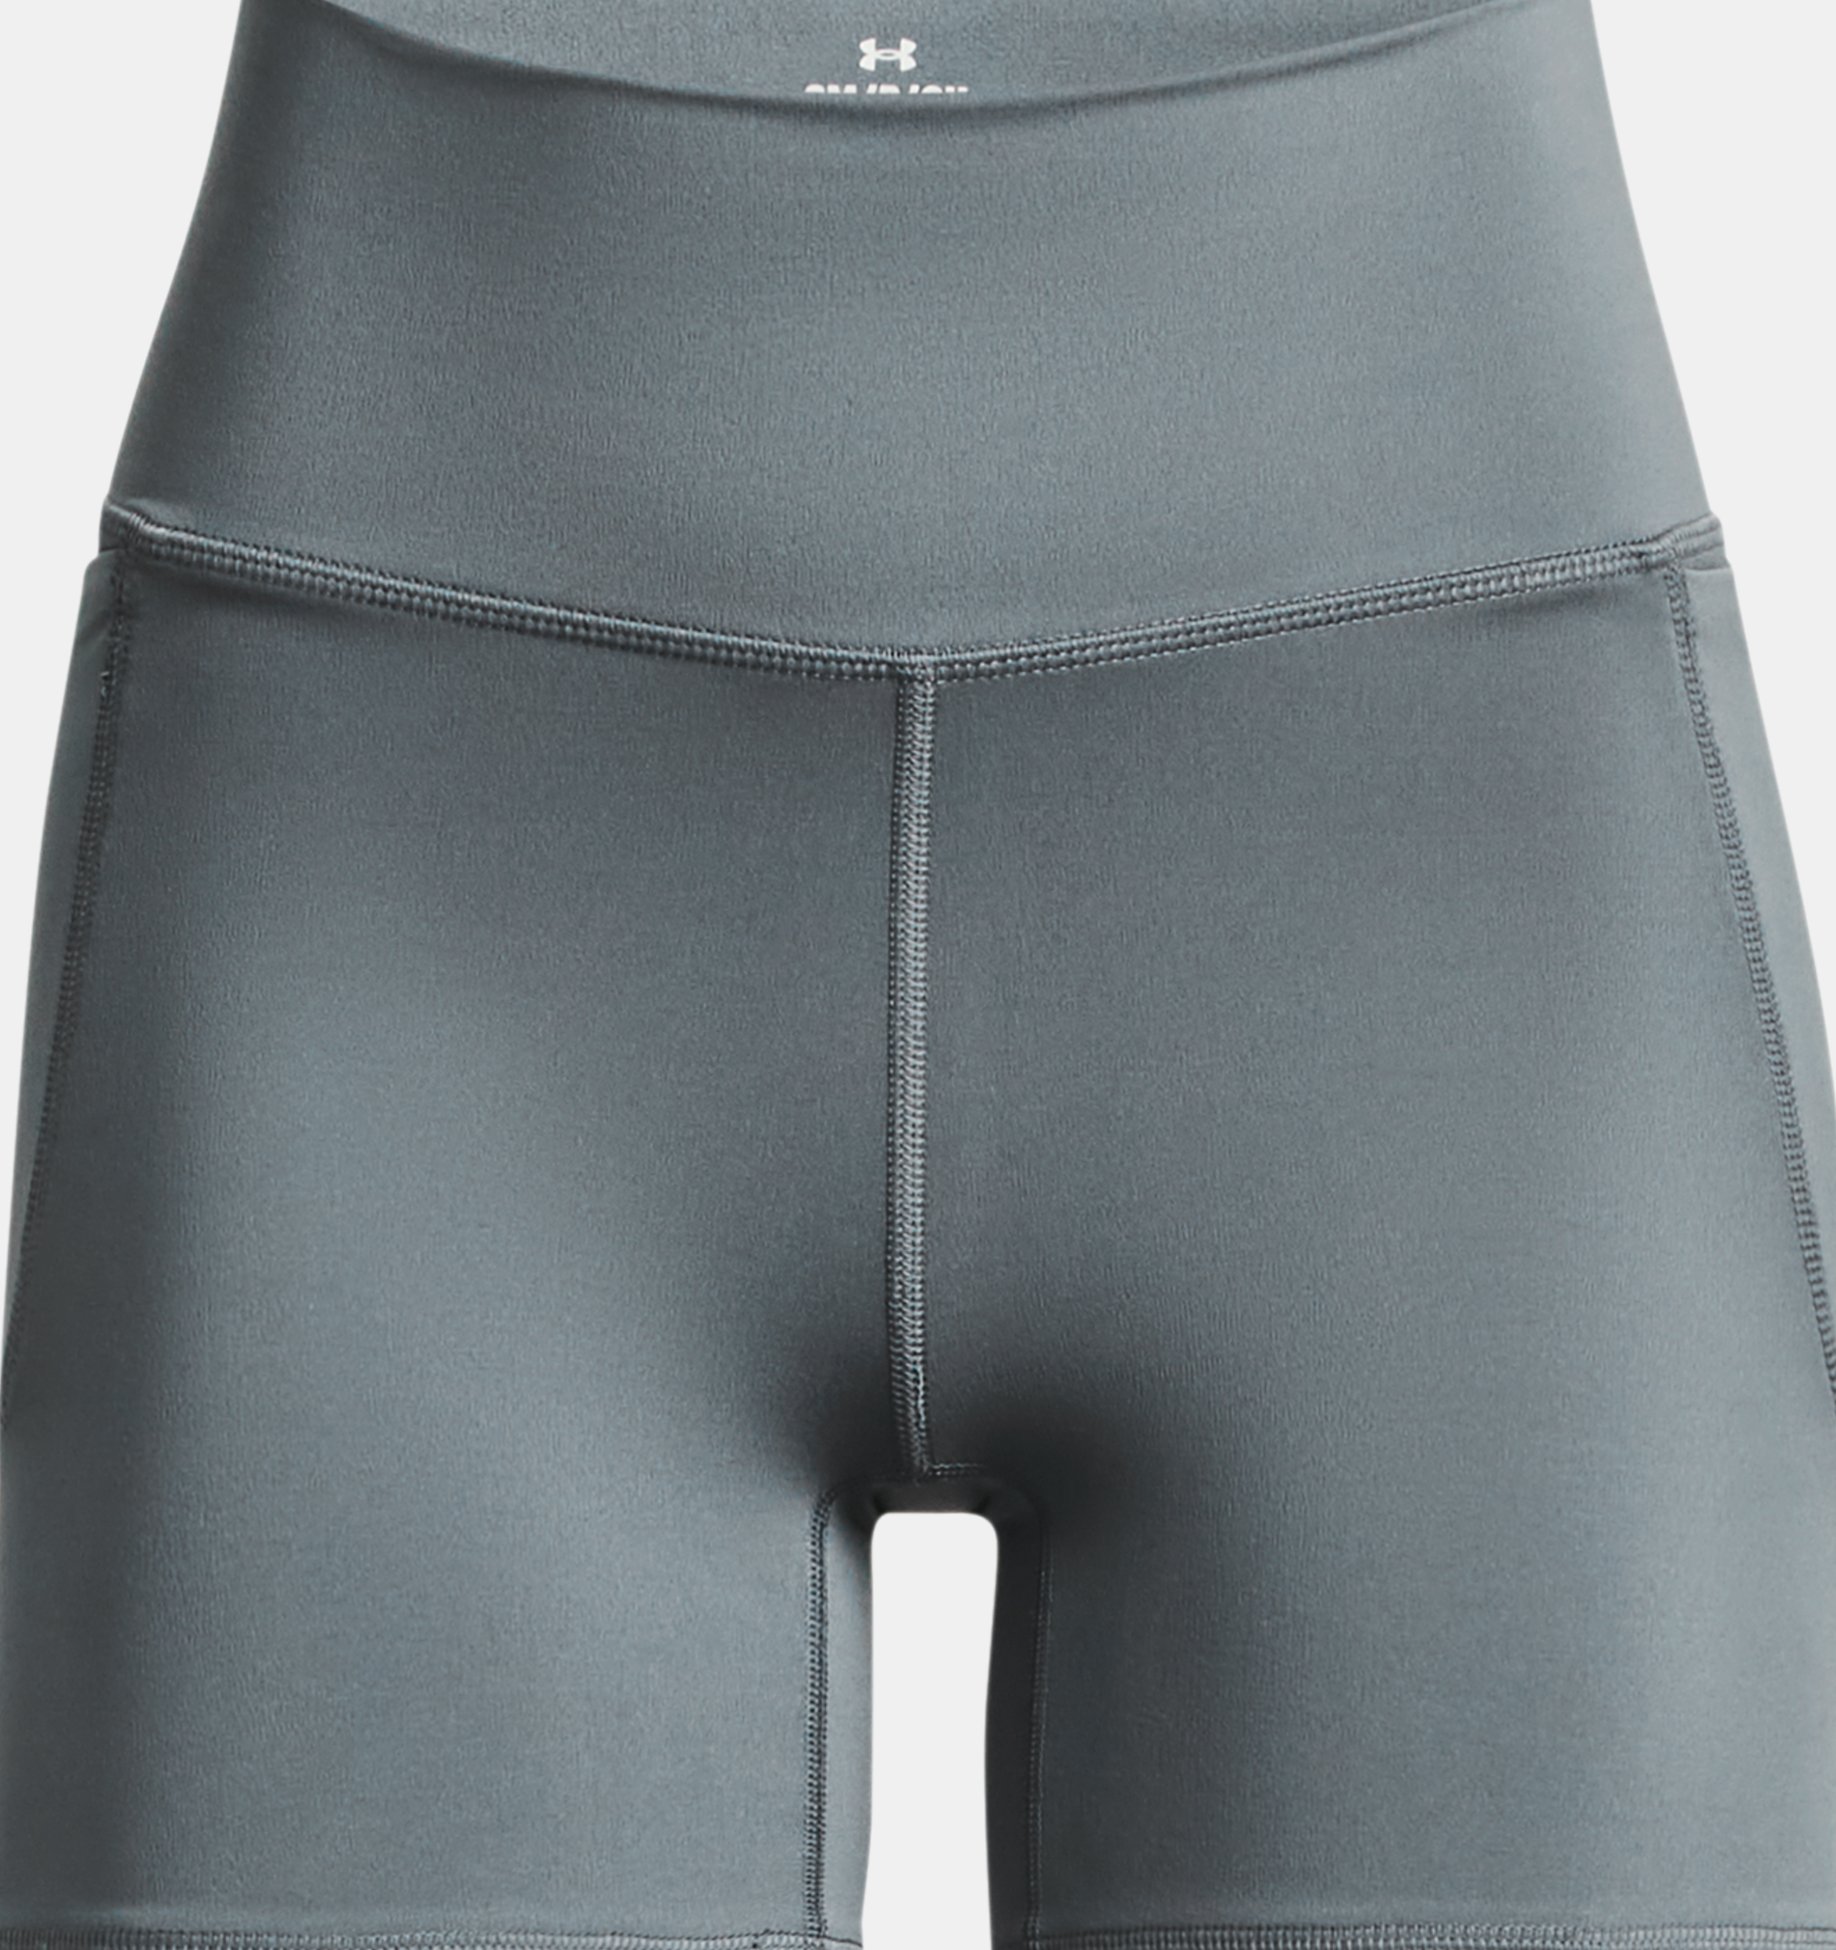 shorts Under Armour Meridian Middy - Black - women´s 